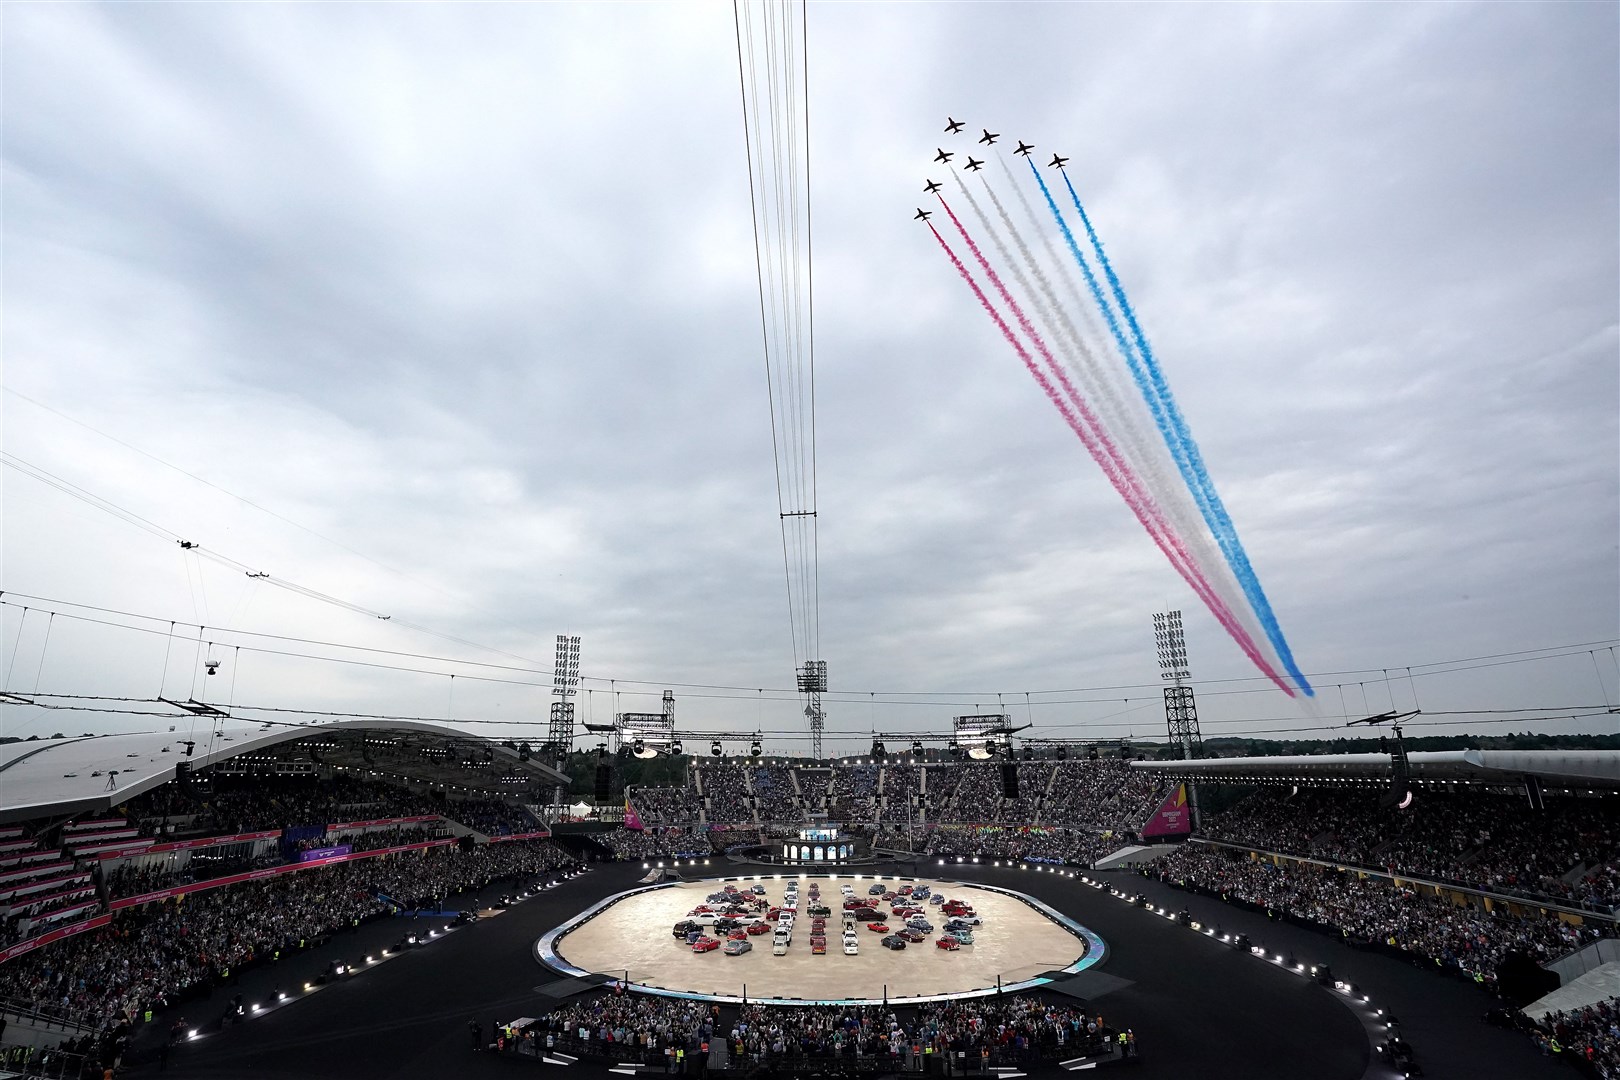 The Red Arrows flypast goes over the stadium during the opening ceremony of the Birmingham 2022 Commonwealth Games at the Alexander Stadium, Birmingham (Zac Goodwin/PA)